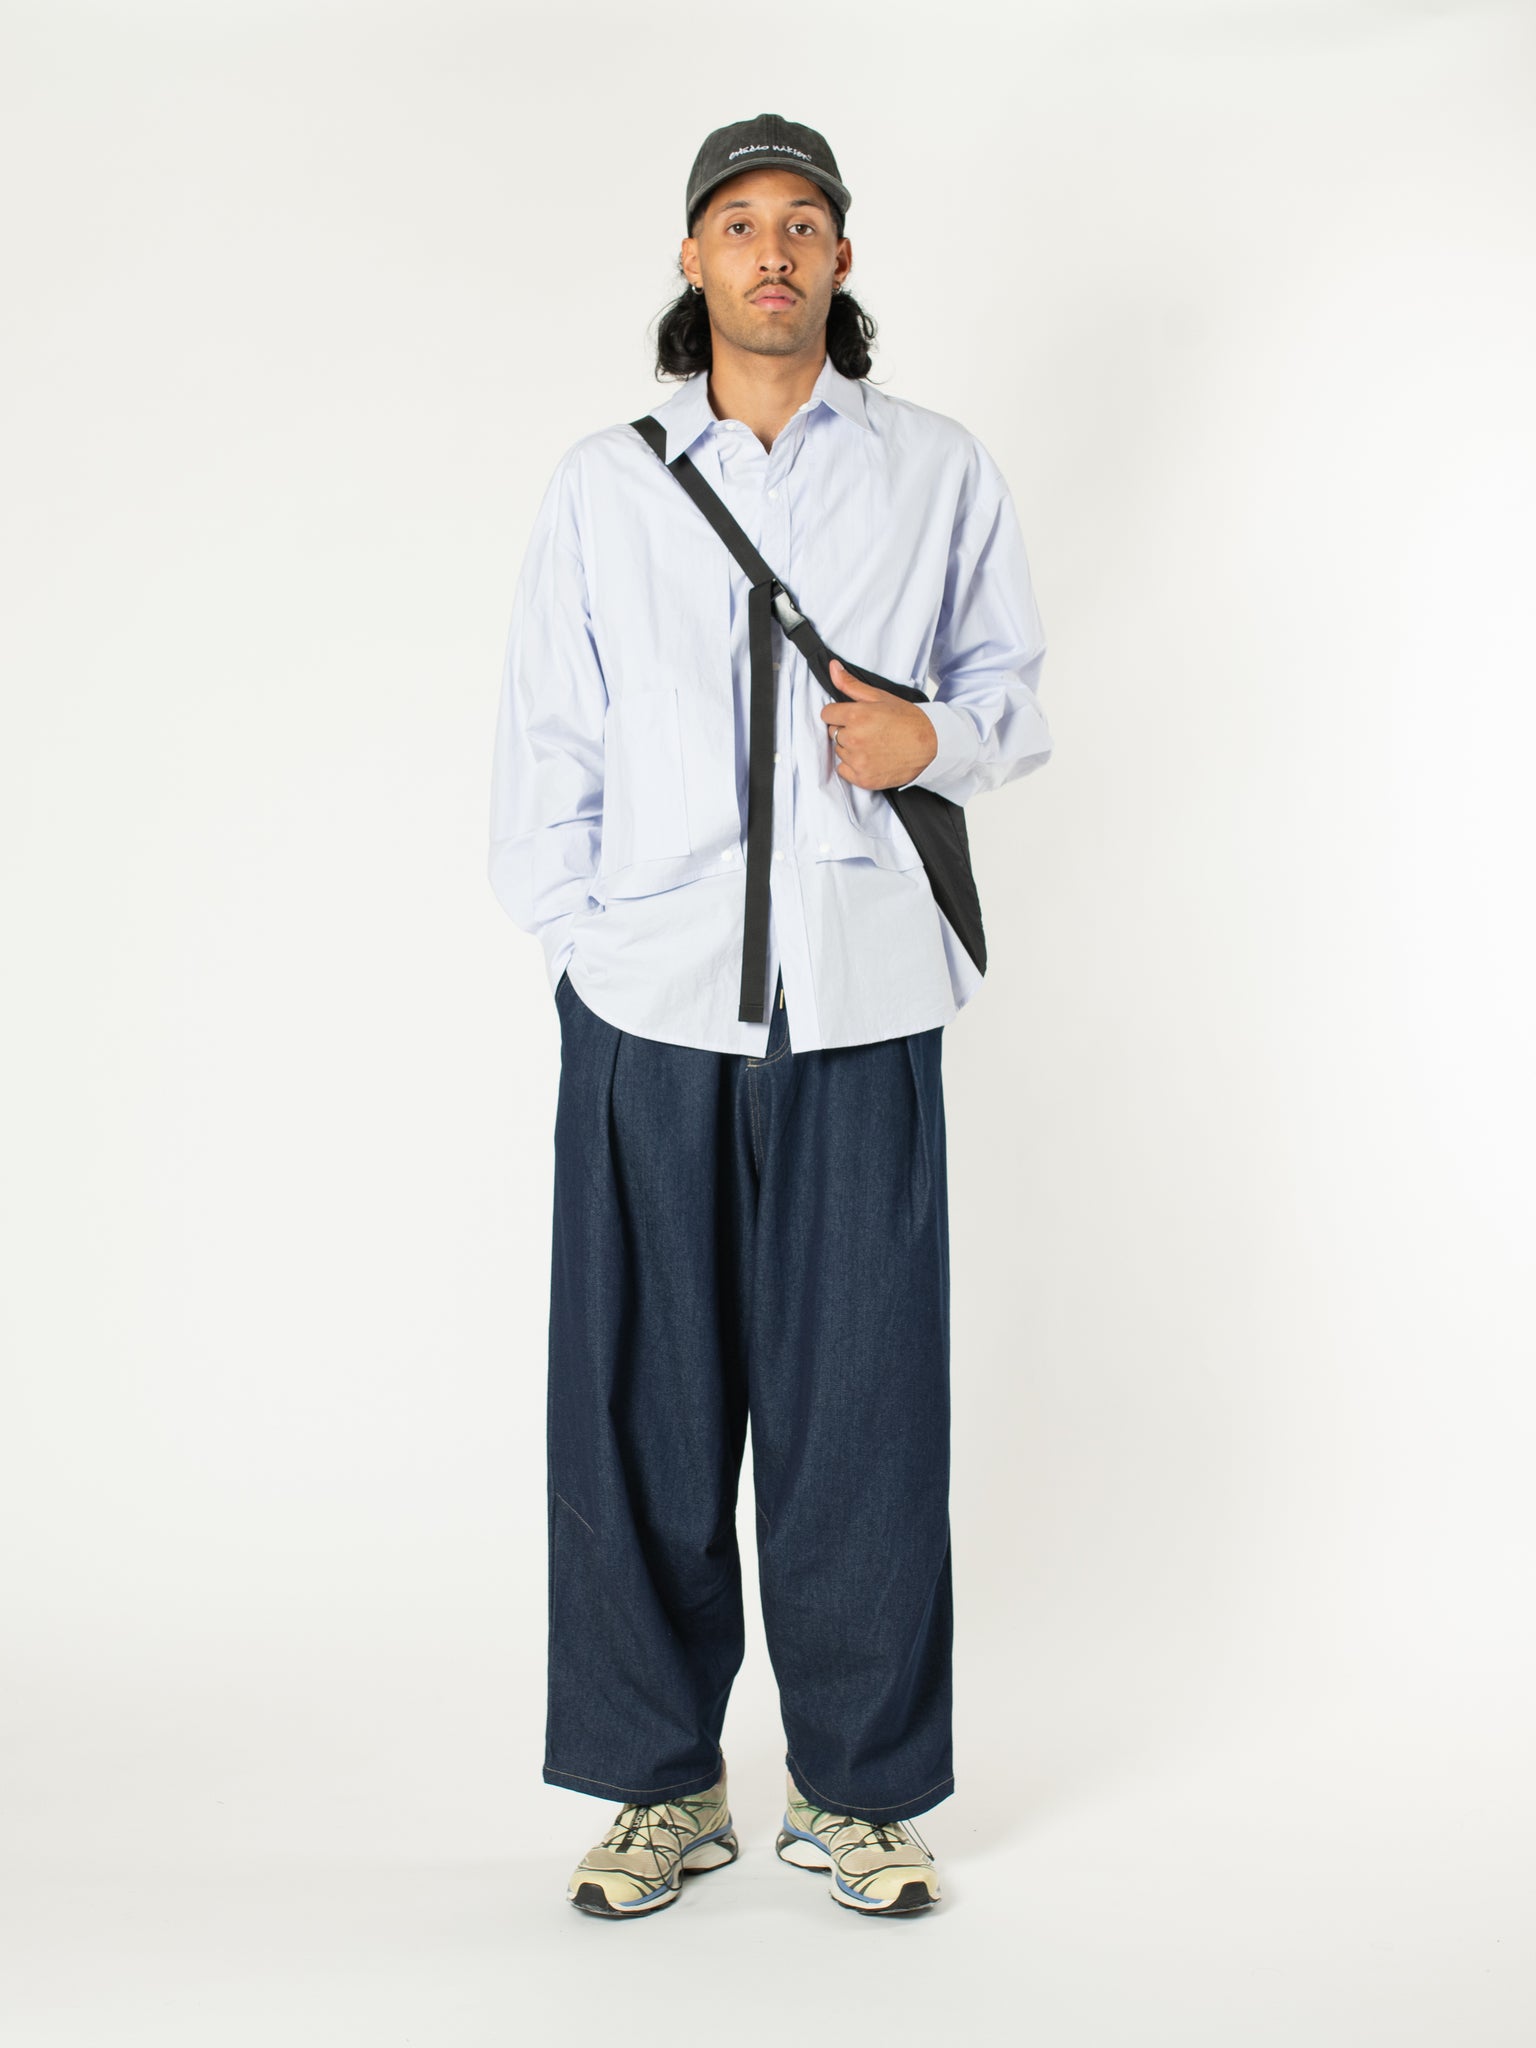 Feldom French Terry Joggers - BLNF11177N - Bench